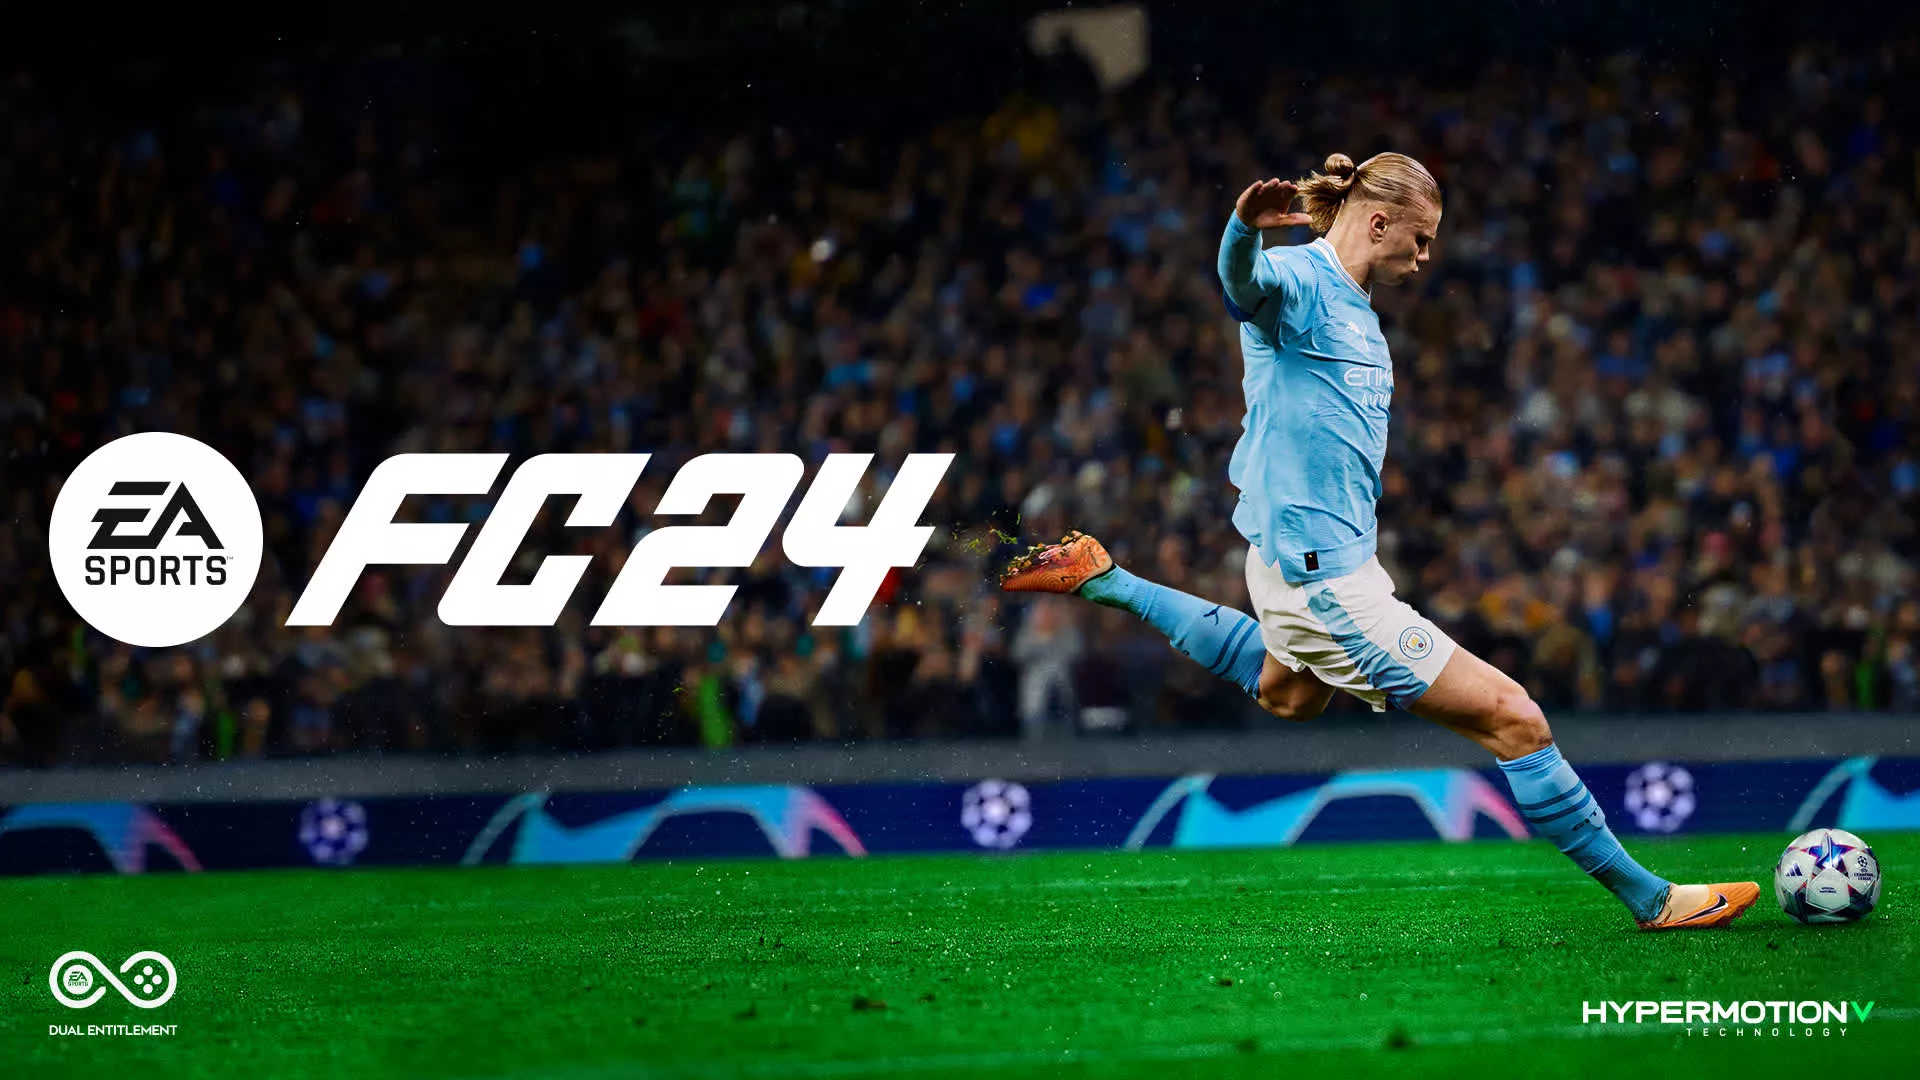 EA Sports FC24 launches September 29, watch the trailer